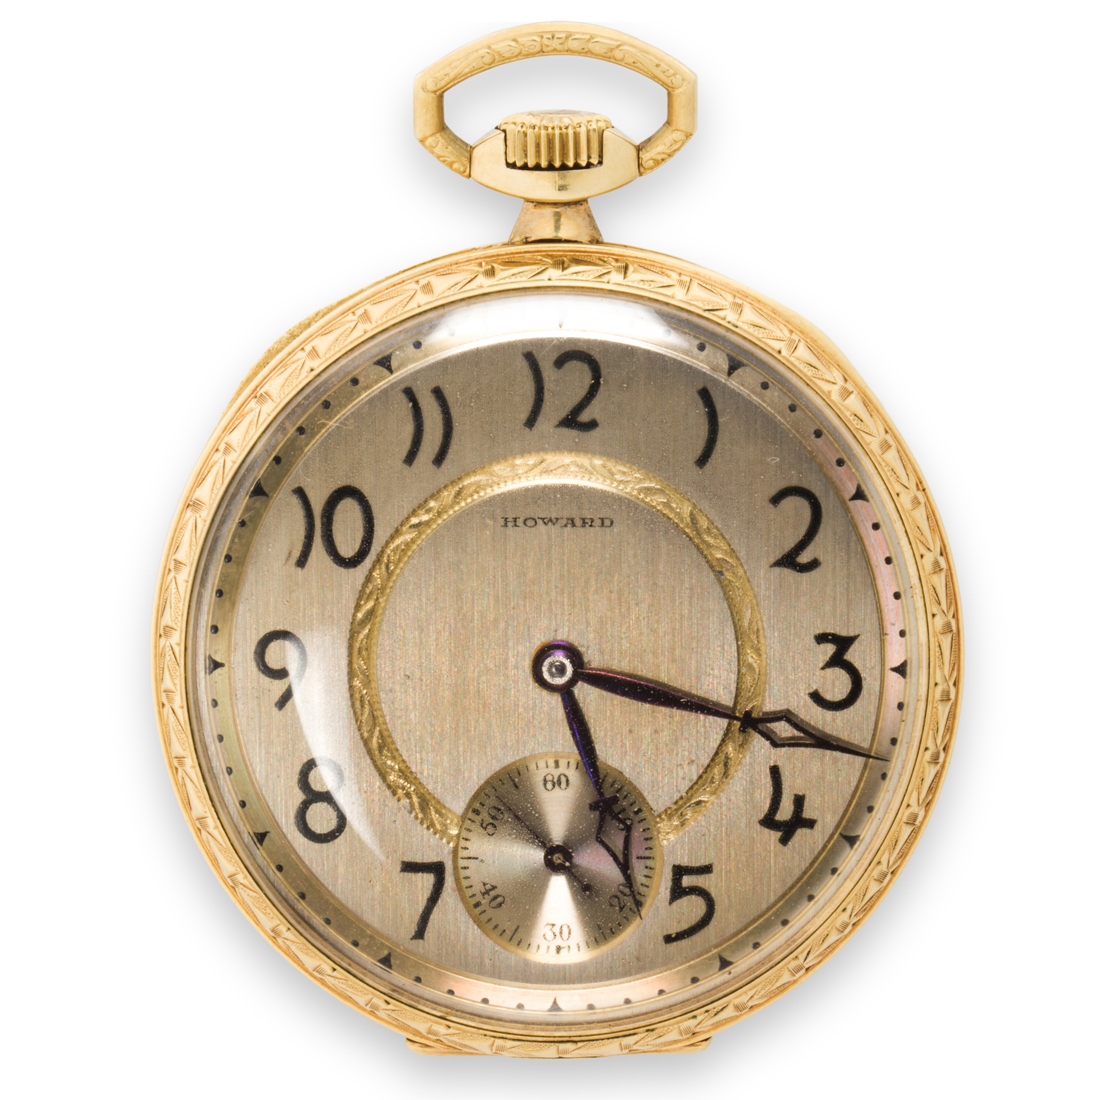 A GOLD FILLED POCKET WATCH HOWARD 3a1874